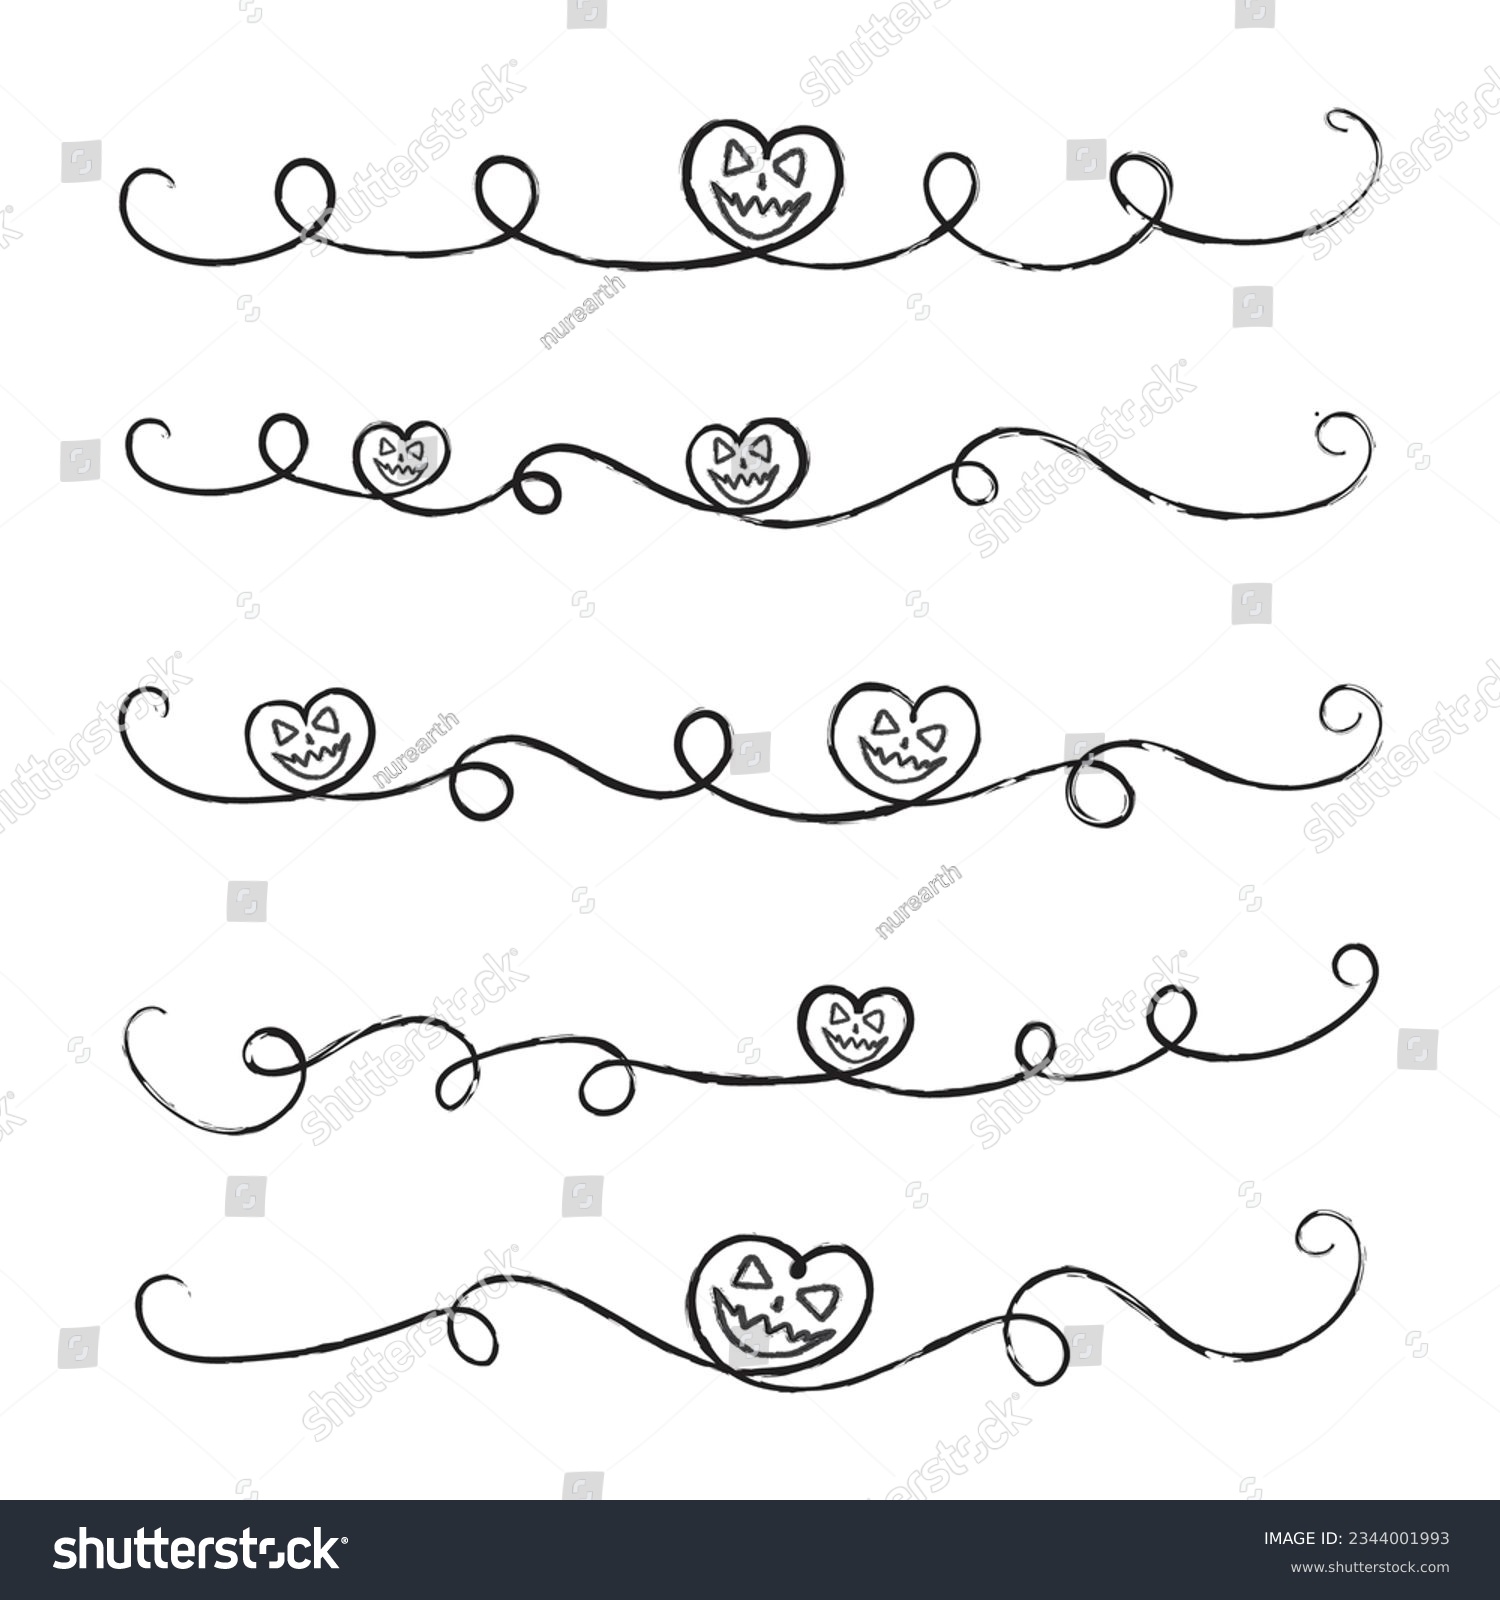 SVG of 
Halloween Heart lines Pumpkin face svg clipart, swirl divider line art calligraphy couple loves ornaments, Thin line brush effect heart flourish decorative elements, hand-drawn love infinity vector
 svg